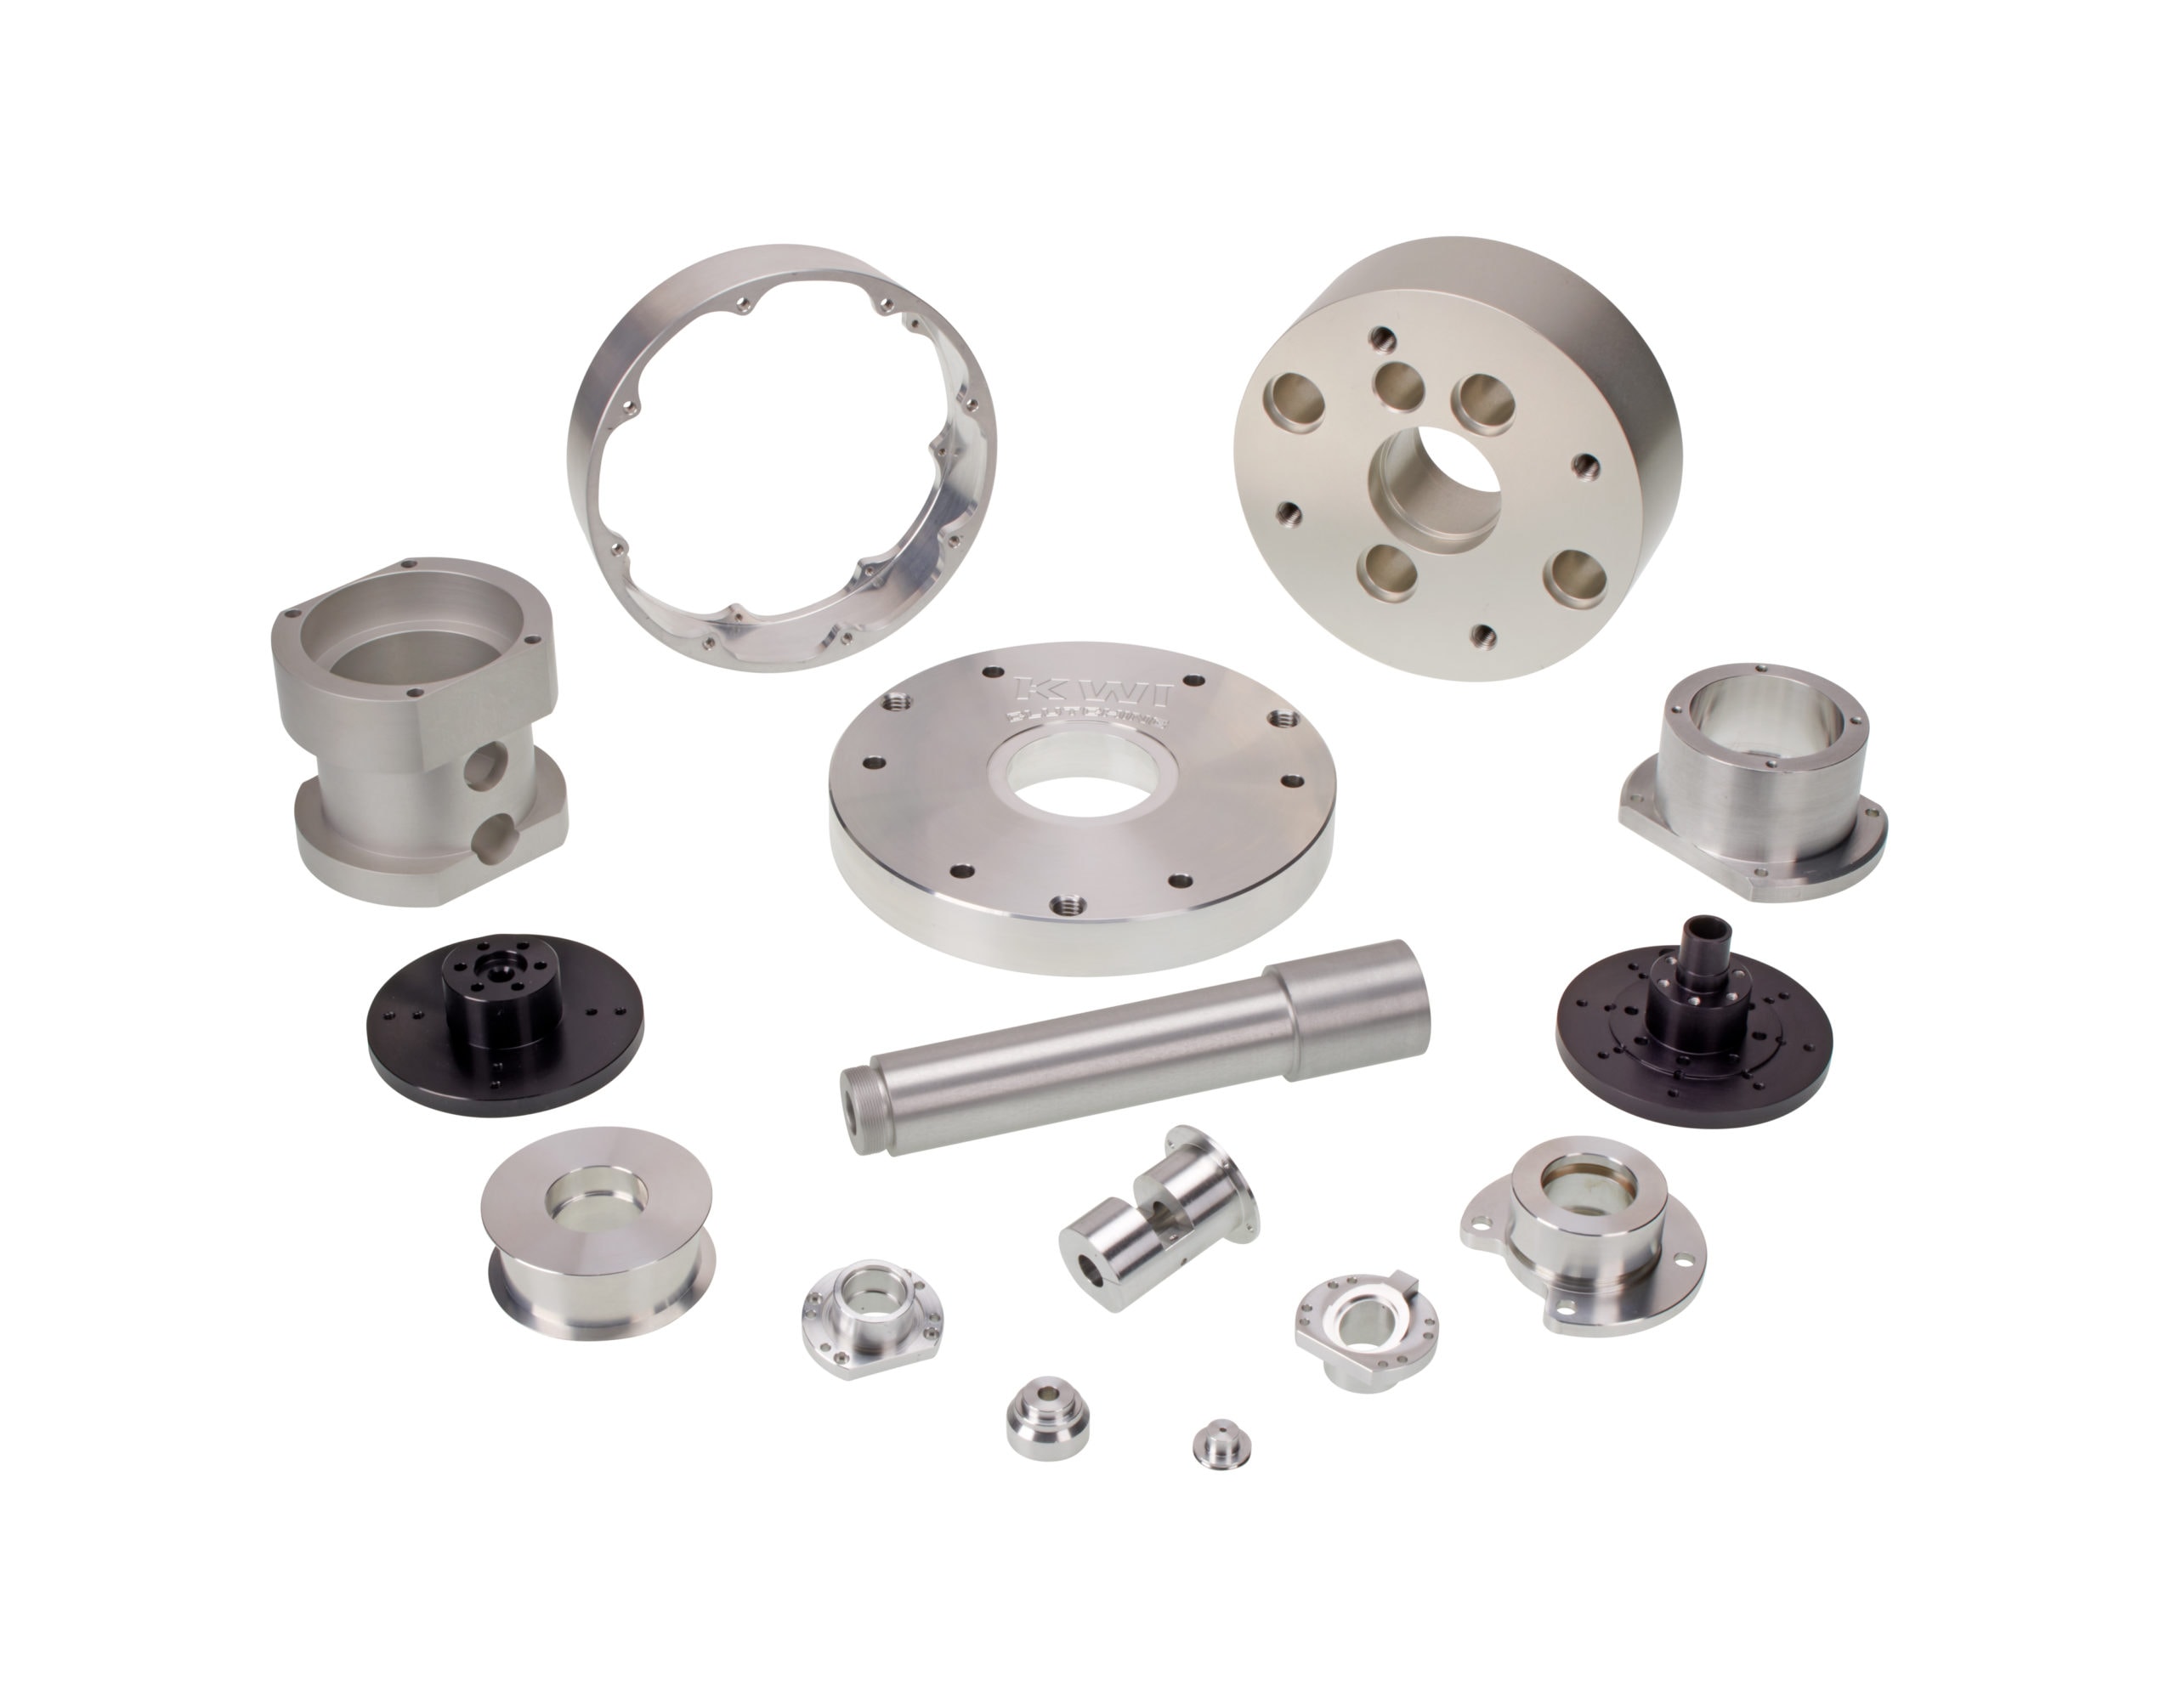 Variety of CNC Turned Parts 4 - CNC Turning Services